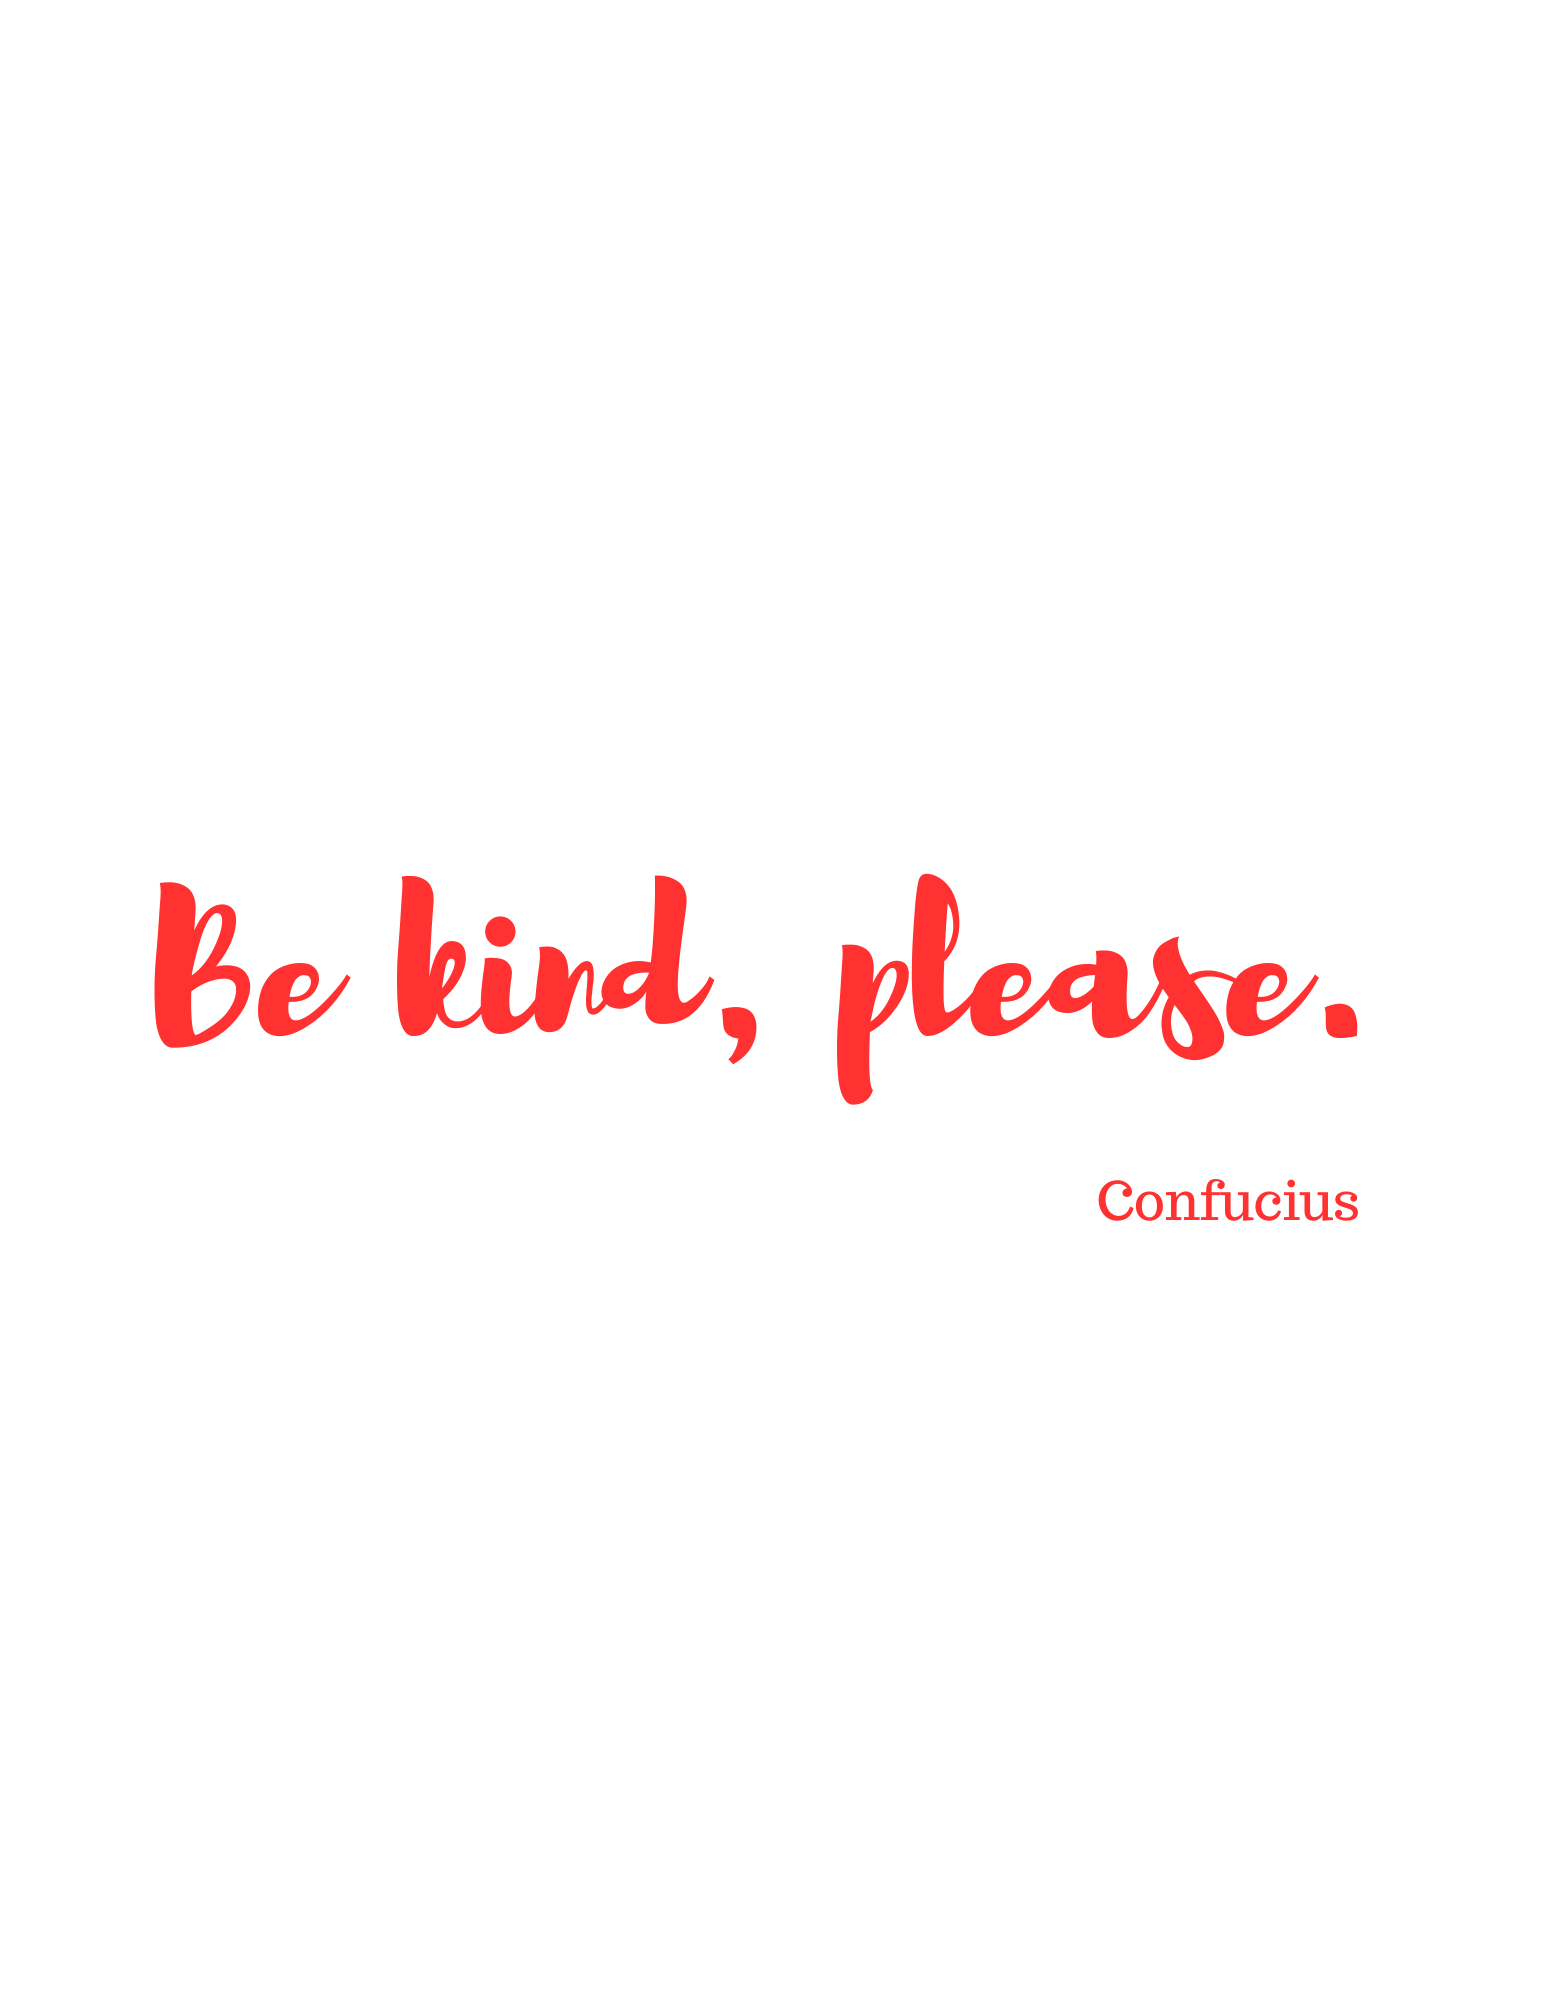 Be kind, please - a quote by confucius.